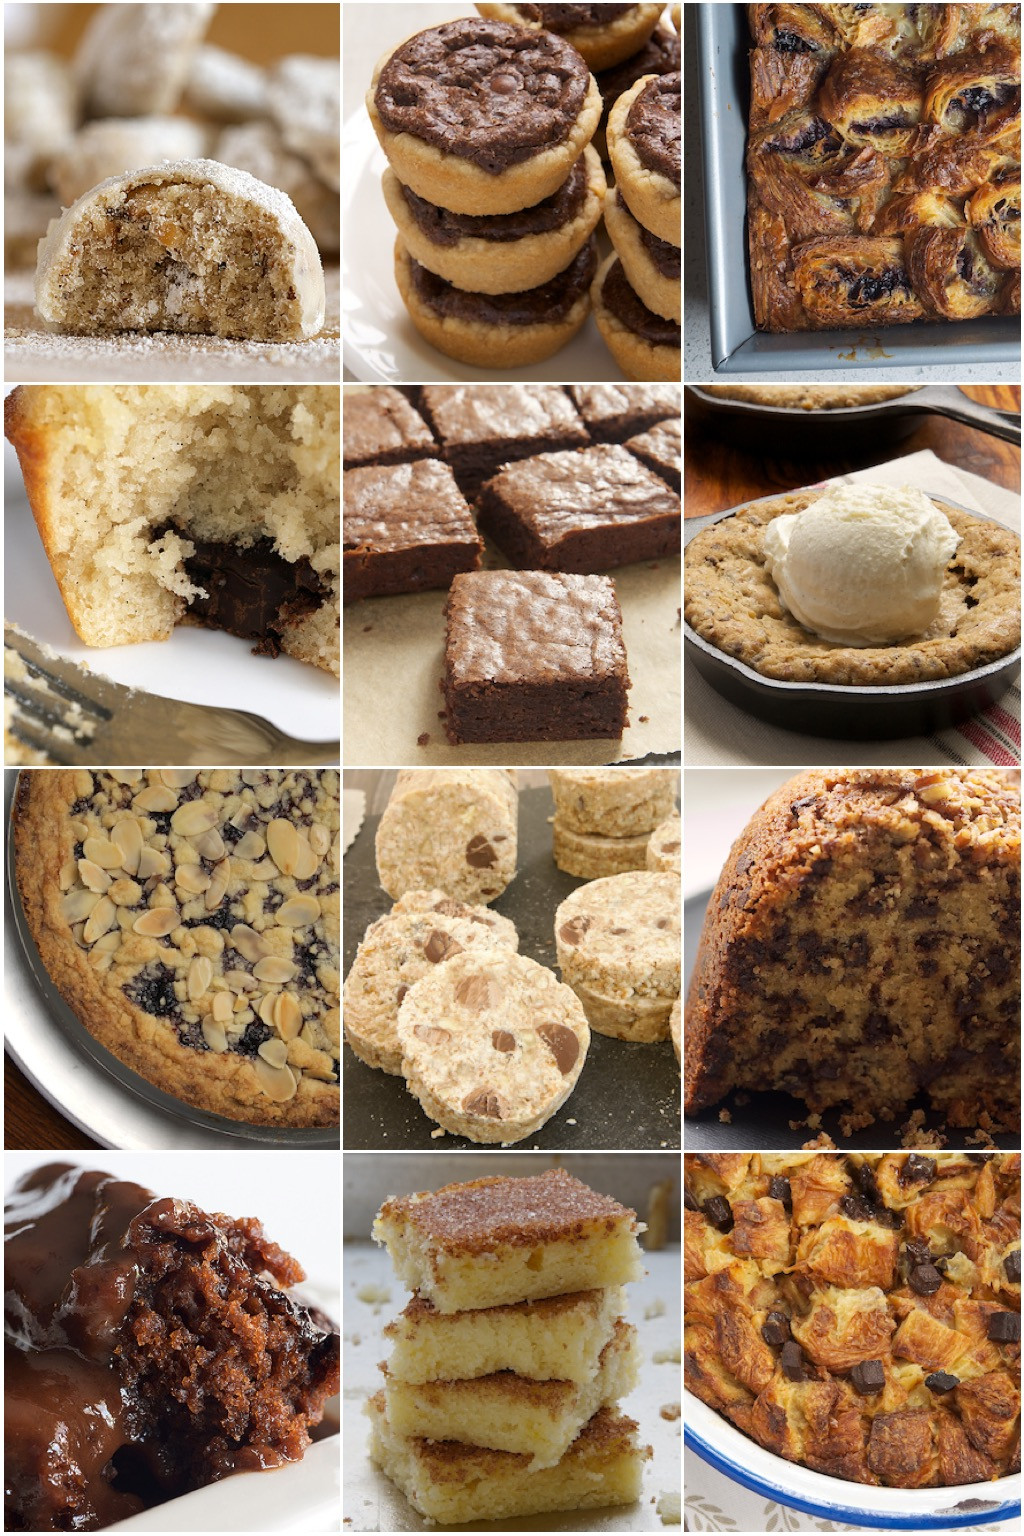 Easy And Quick Desserts
 Best Quick and Easy Desserts Bake or Break